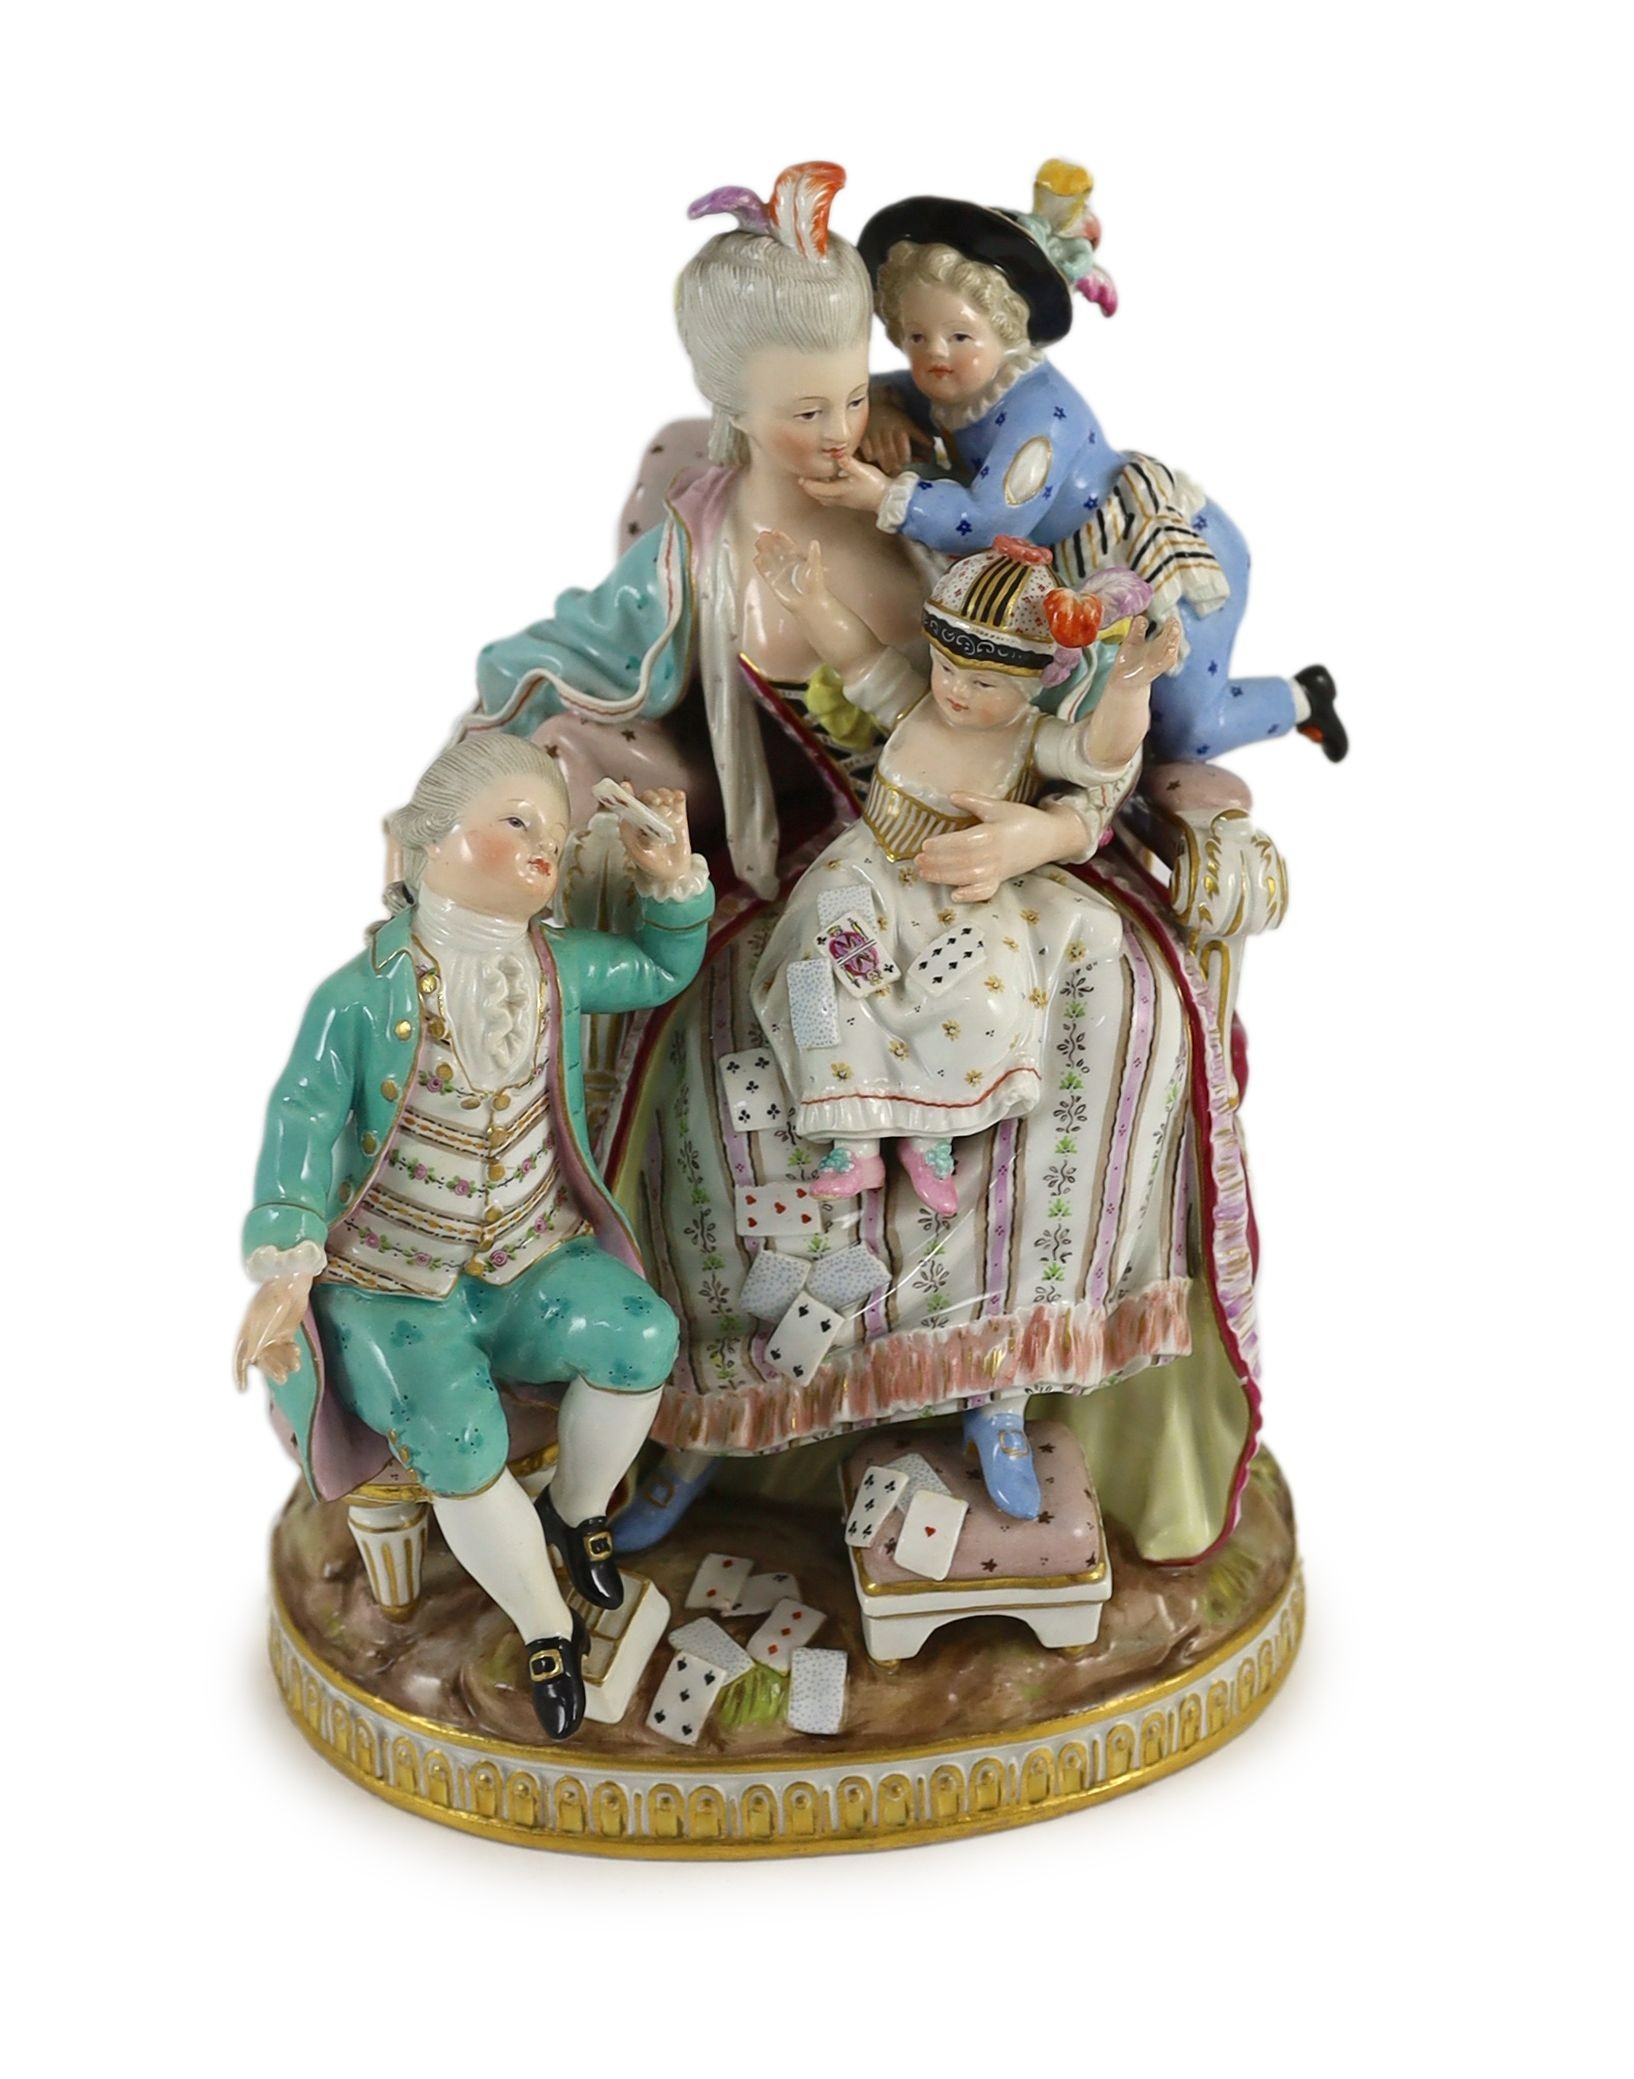 A Meissen group of the good mother, 19th century, after a model by Michel Victor Acier, blue crossed